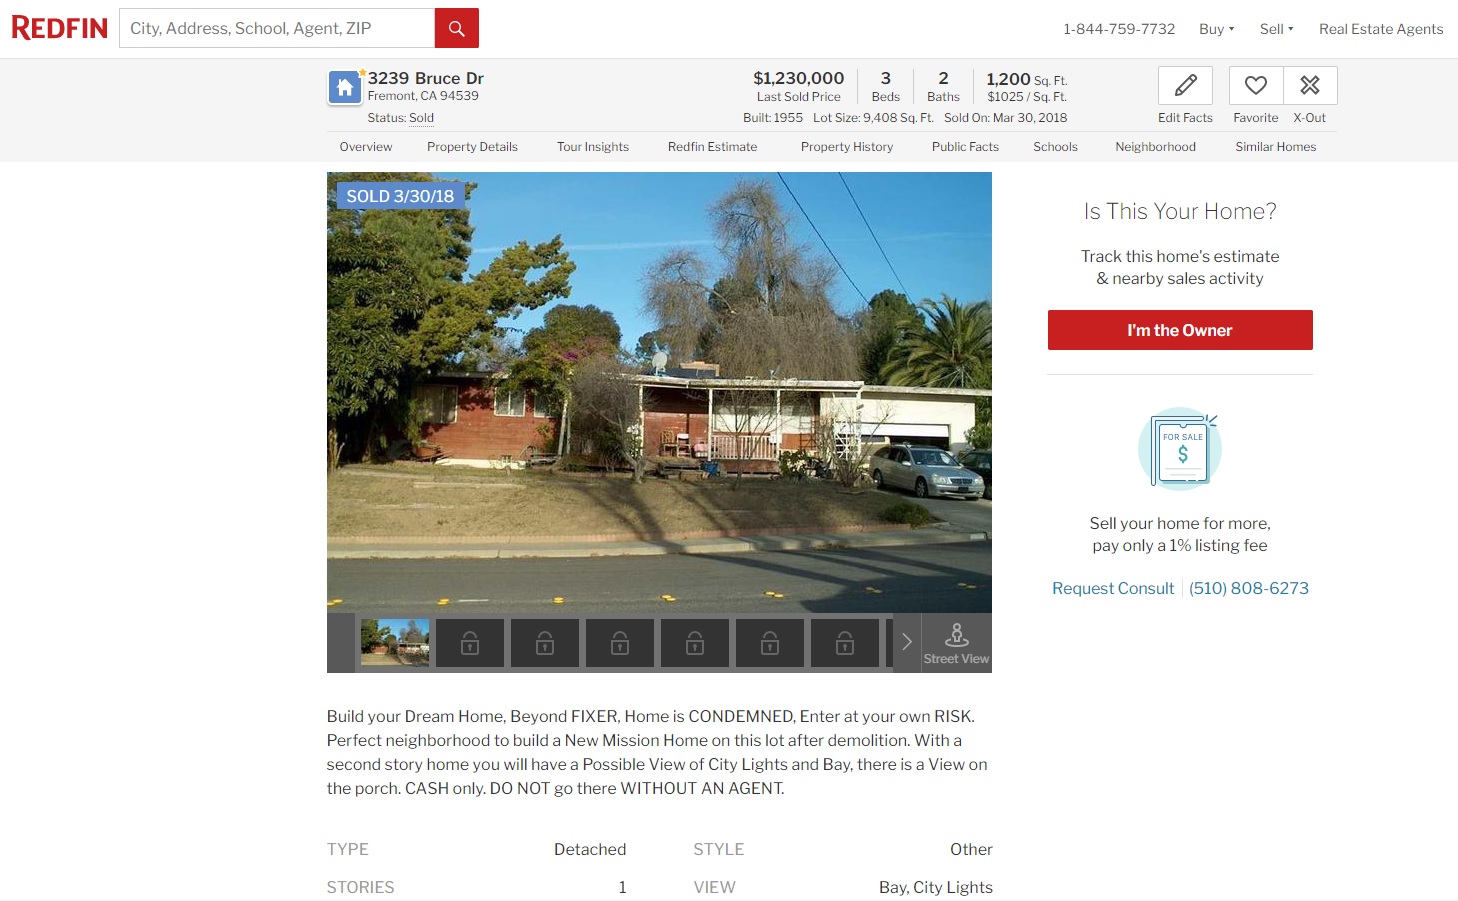 Listing on Redfin.com of a condemned home in Fremont being sold for $1.23 million. (Redfin)